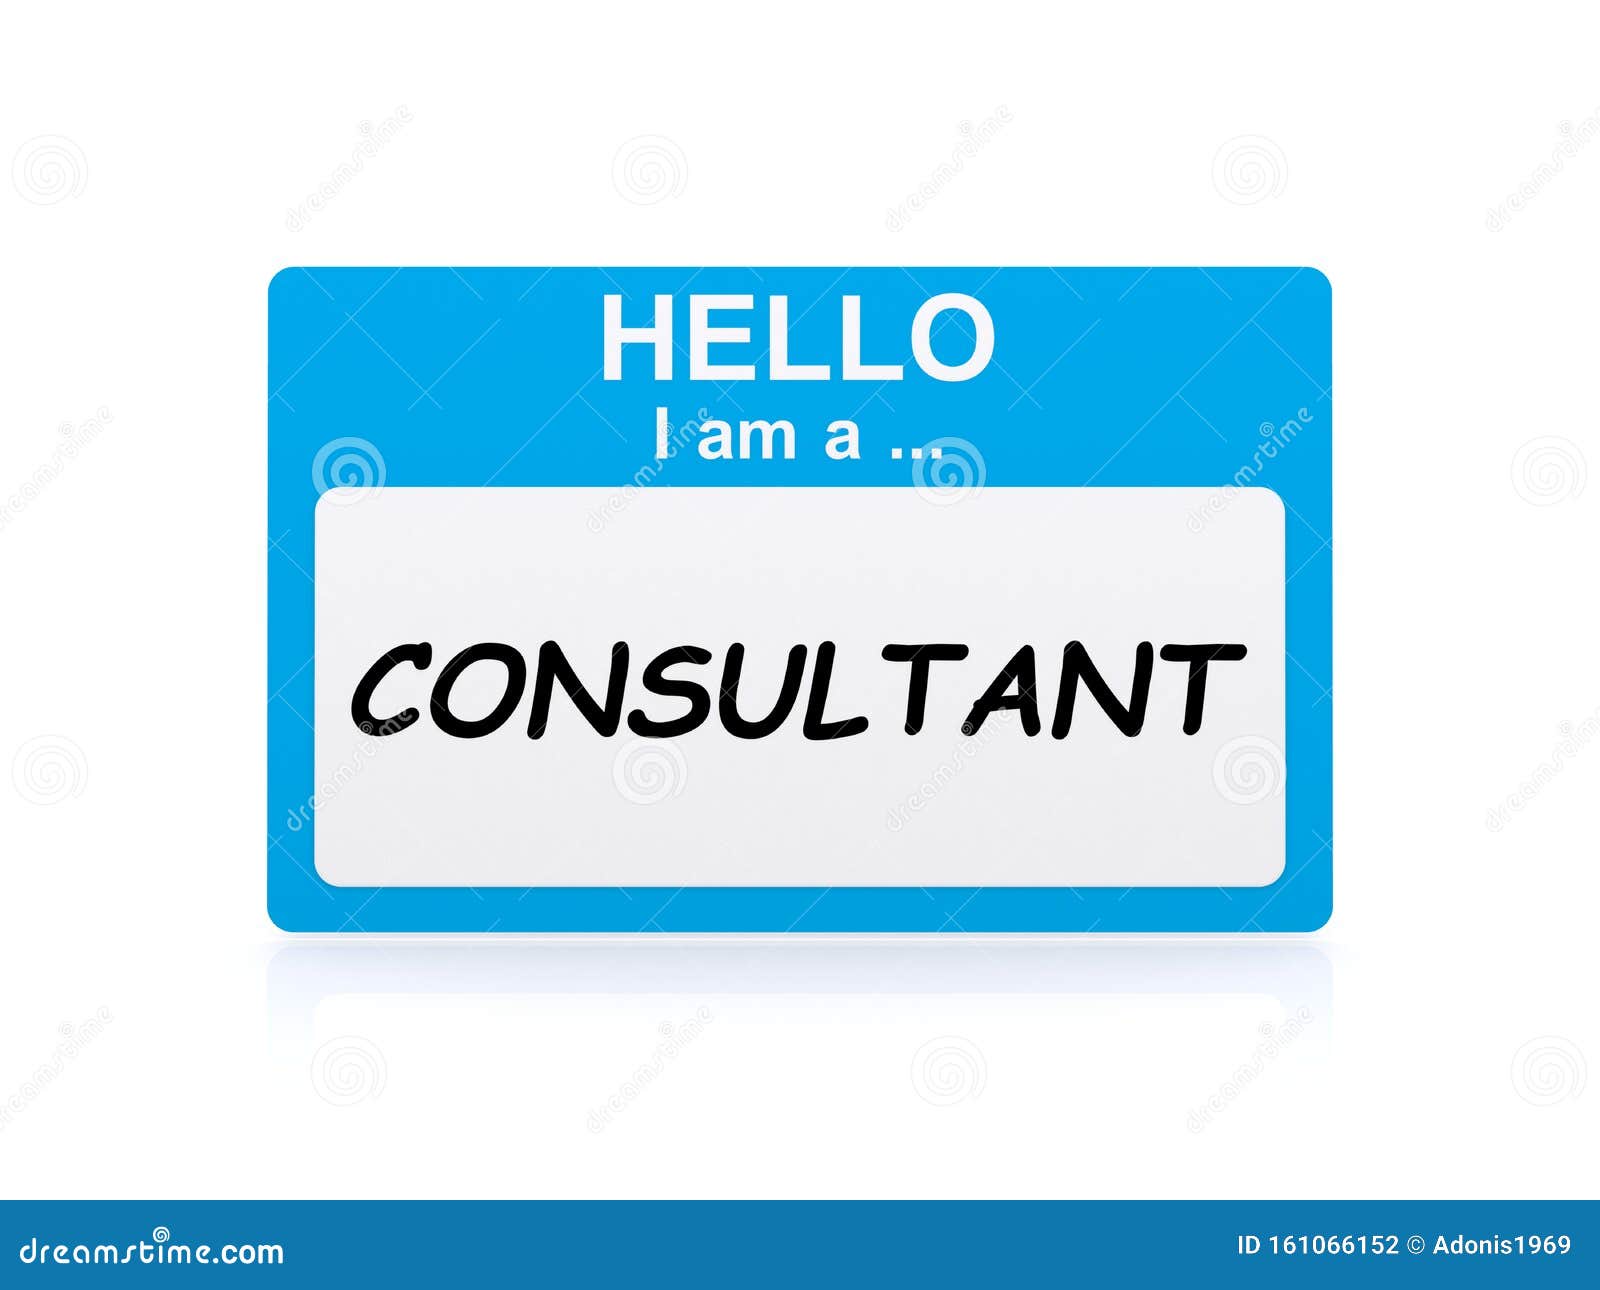 i am a consultant tag